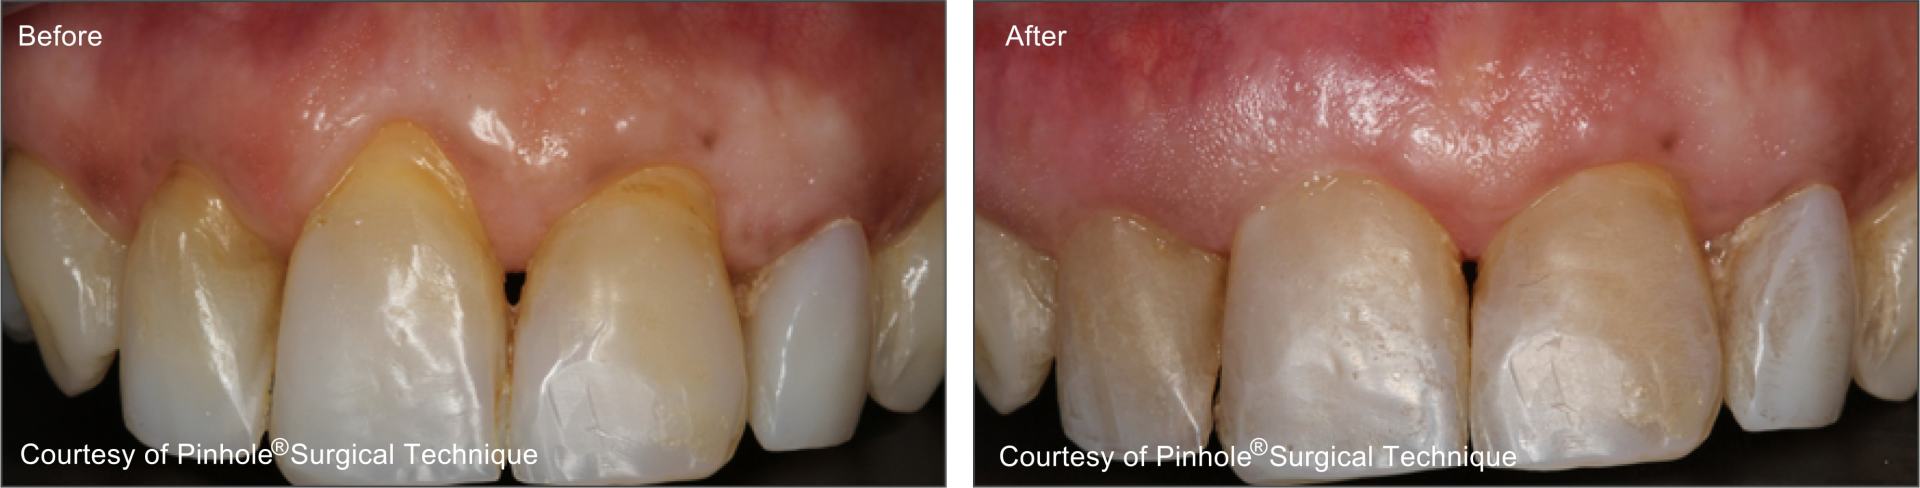 Teeth image 7 — East Hills Family Dentistry in Anaheim Hills, CA